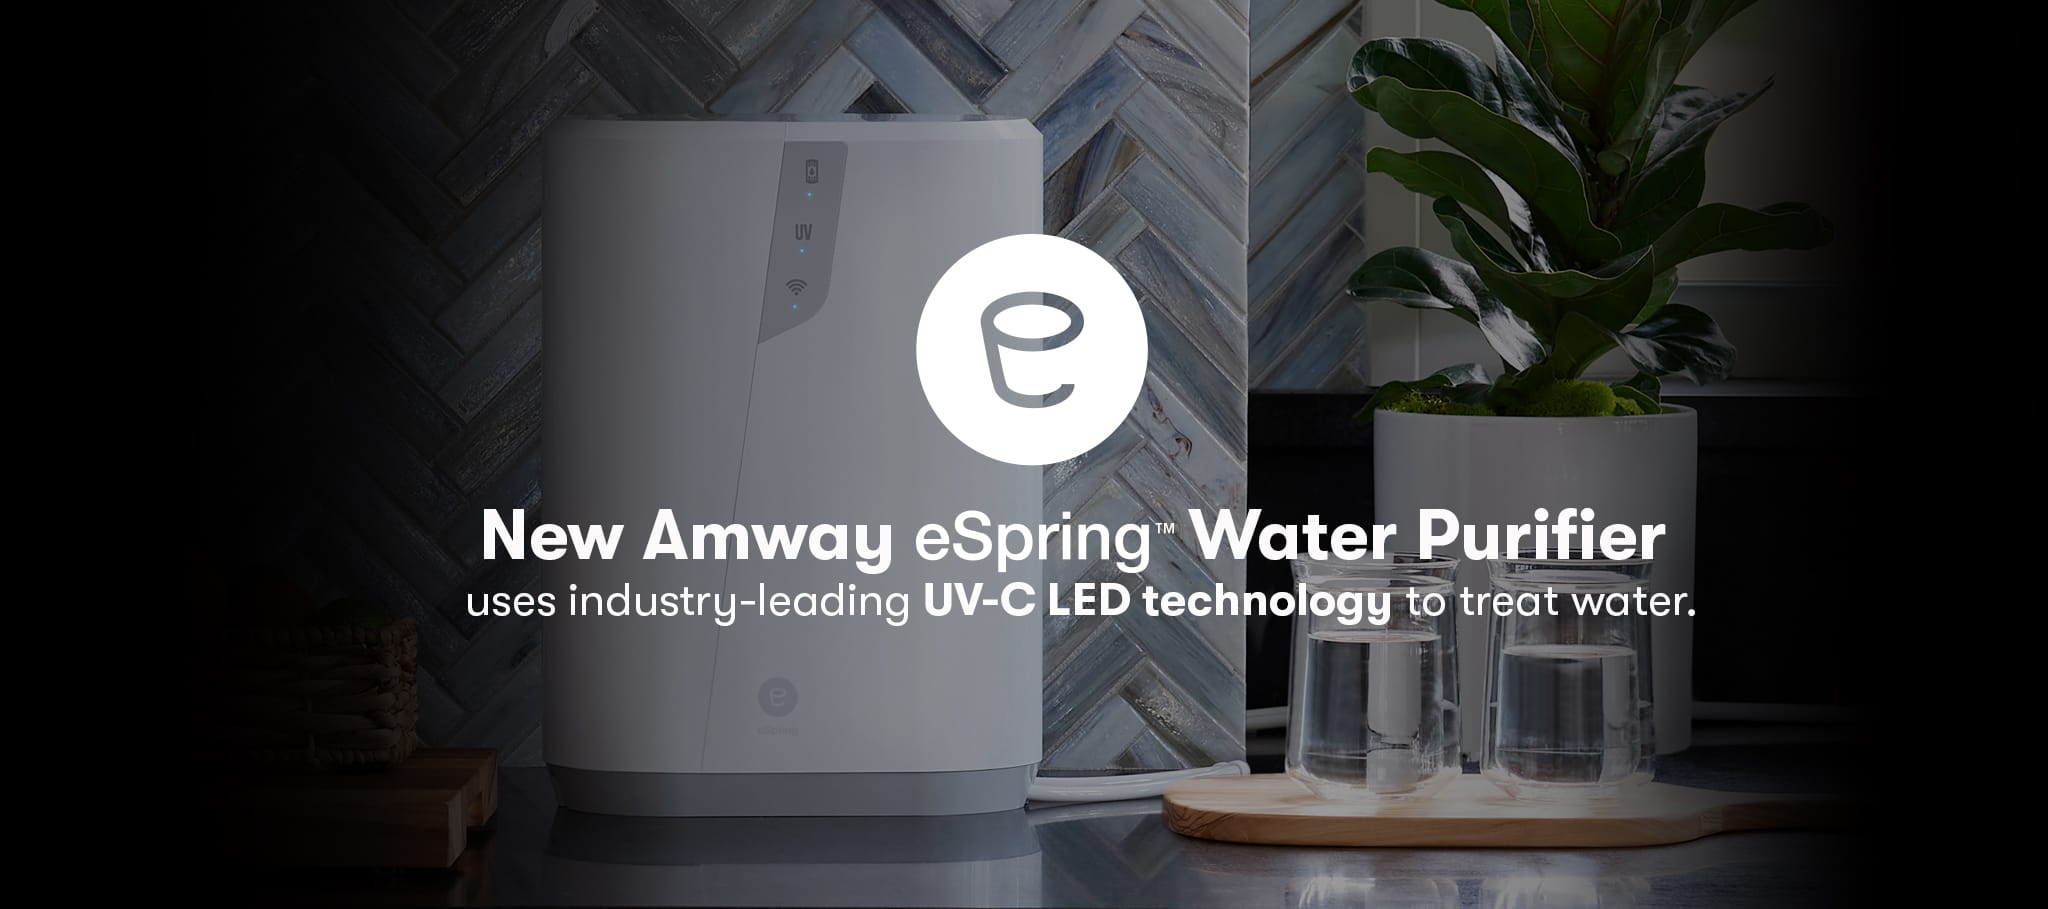 New Amway eSpring™ Water Purifier uses industry-leading UV-C LED